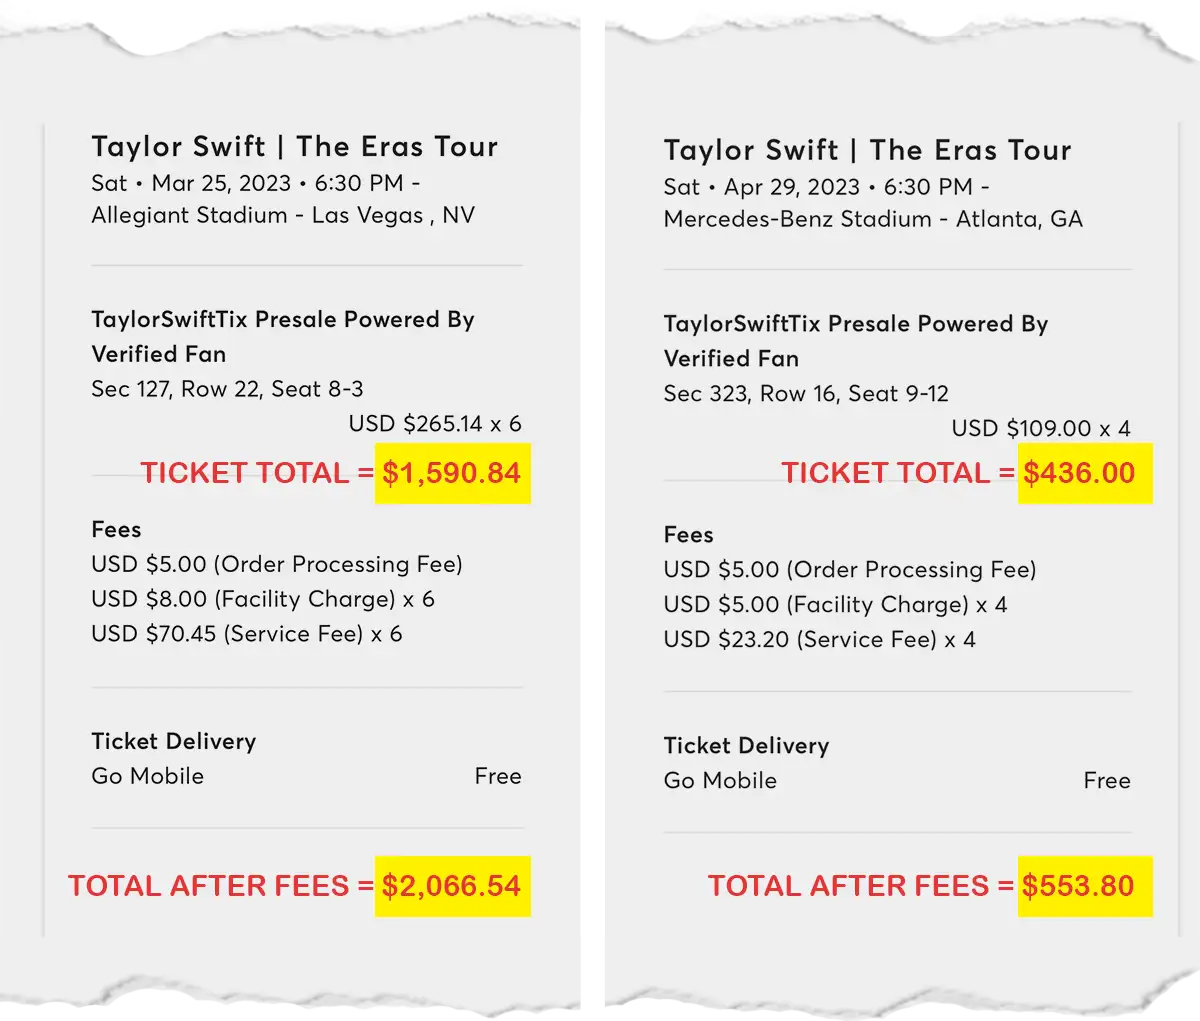 Sell tickets with 90% fewer fees!